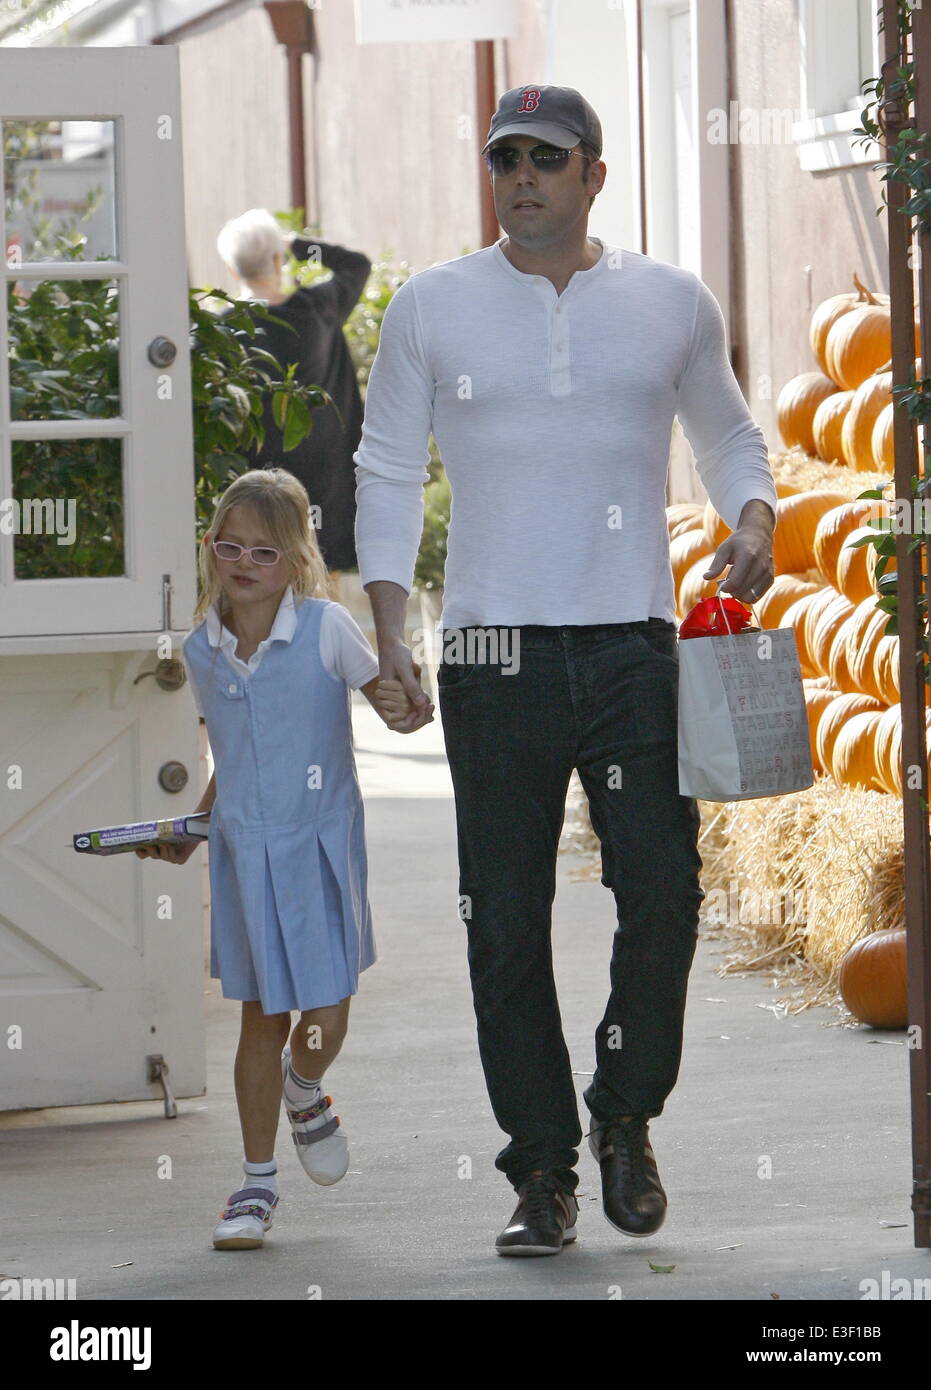 Ben Affleck wearing a tight fitting white shirt at Brentwood Country Mart with his daughter Violet  Featuring: Ben Affleck,Violet Affleck Where: Los Angeles, CA, United States When: 24 Oct 2013 Stock Photo